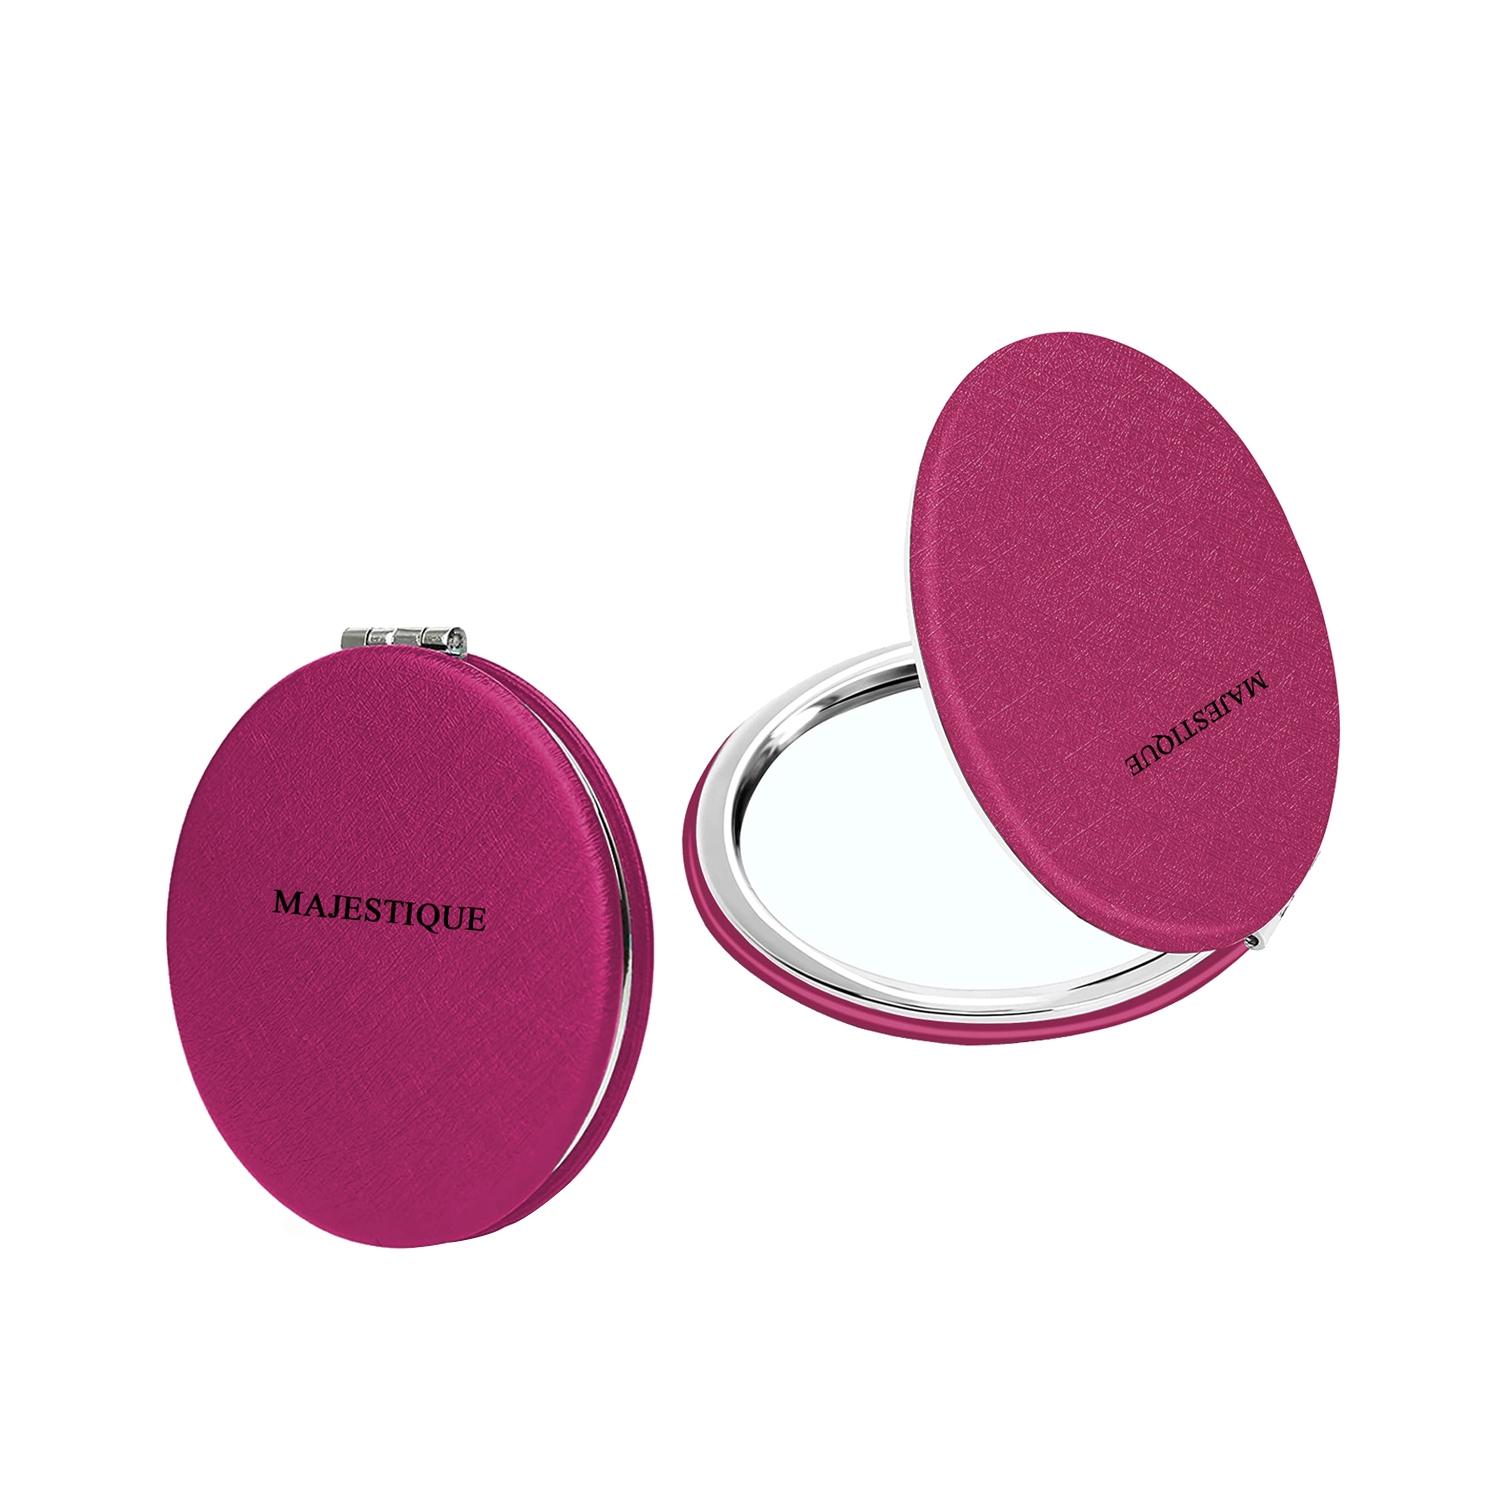 majestique professional pocket makeup foldable mirror with compact size - pink